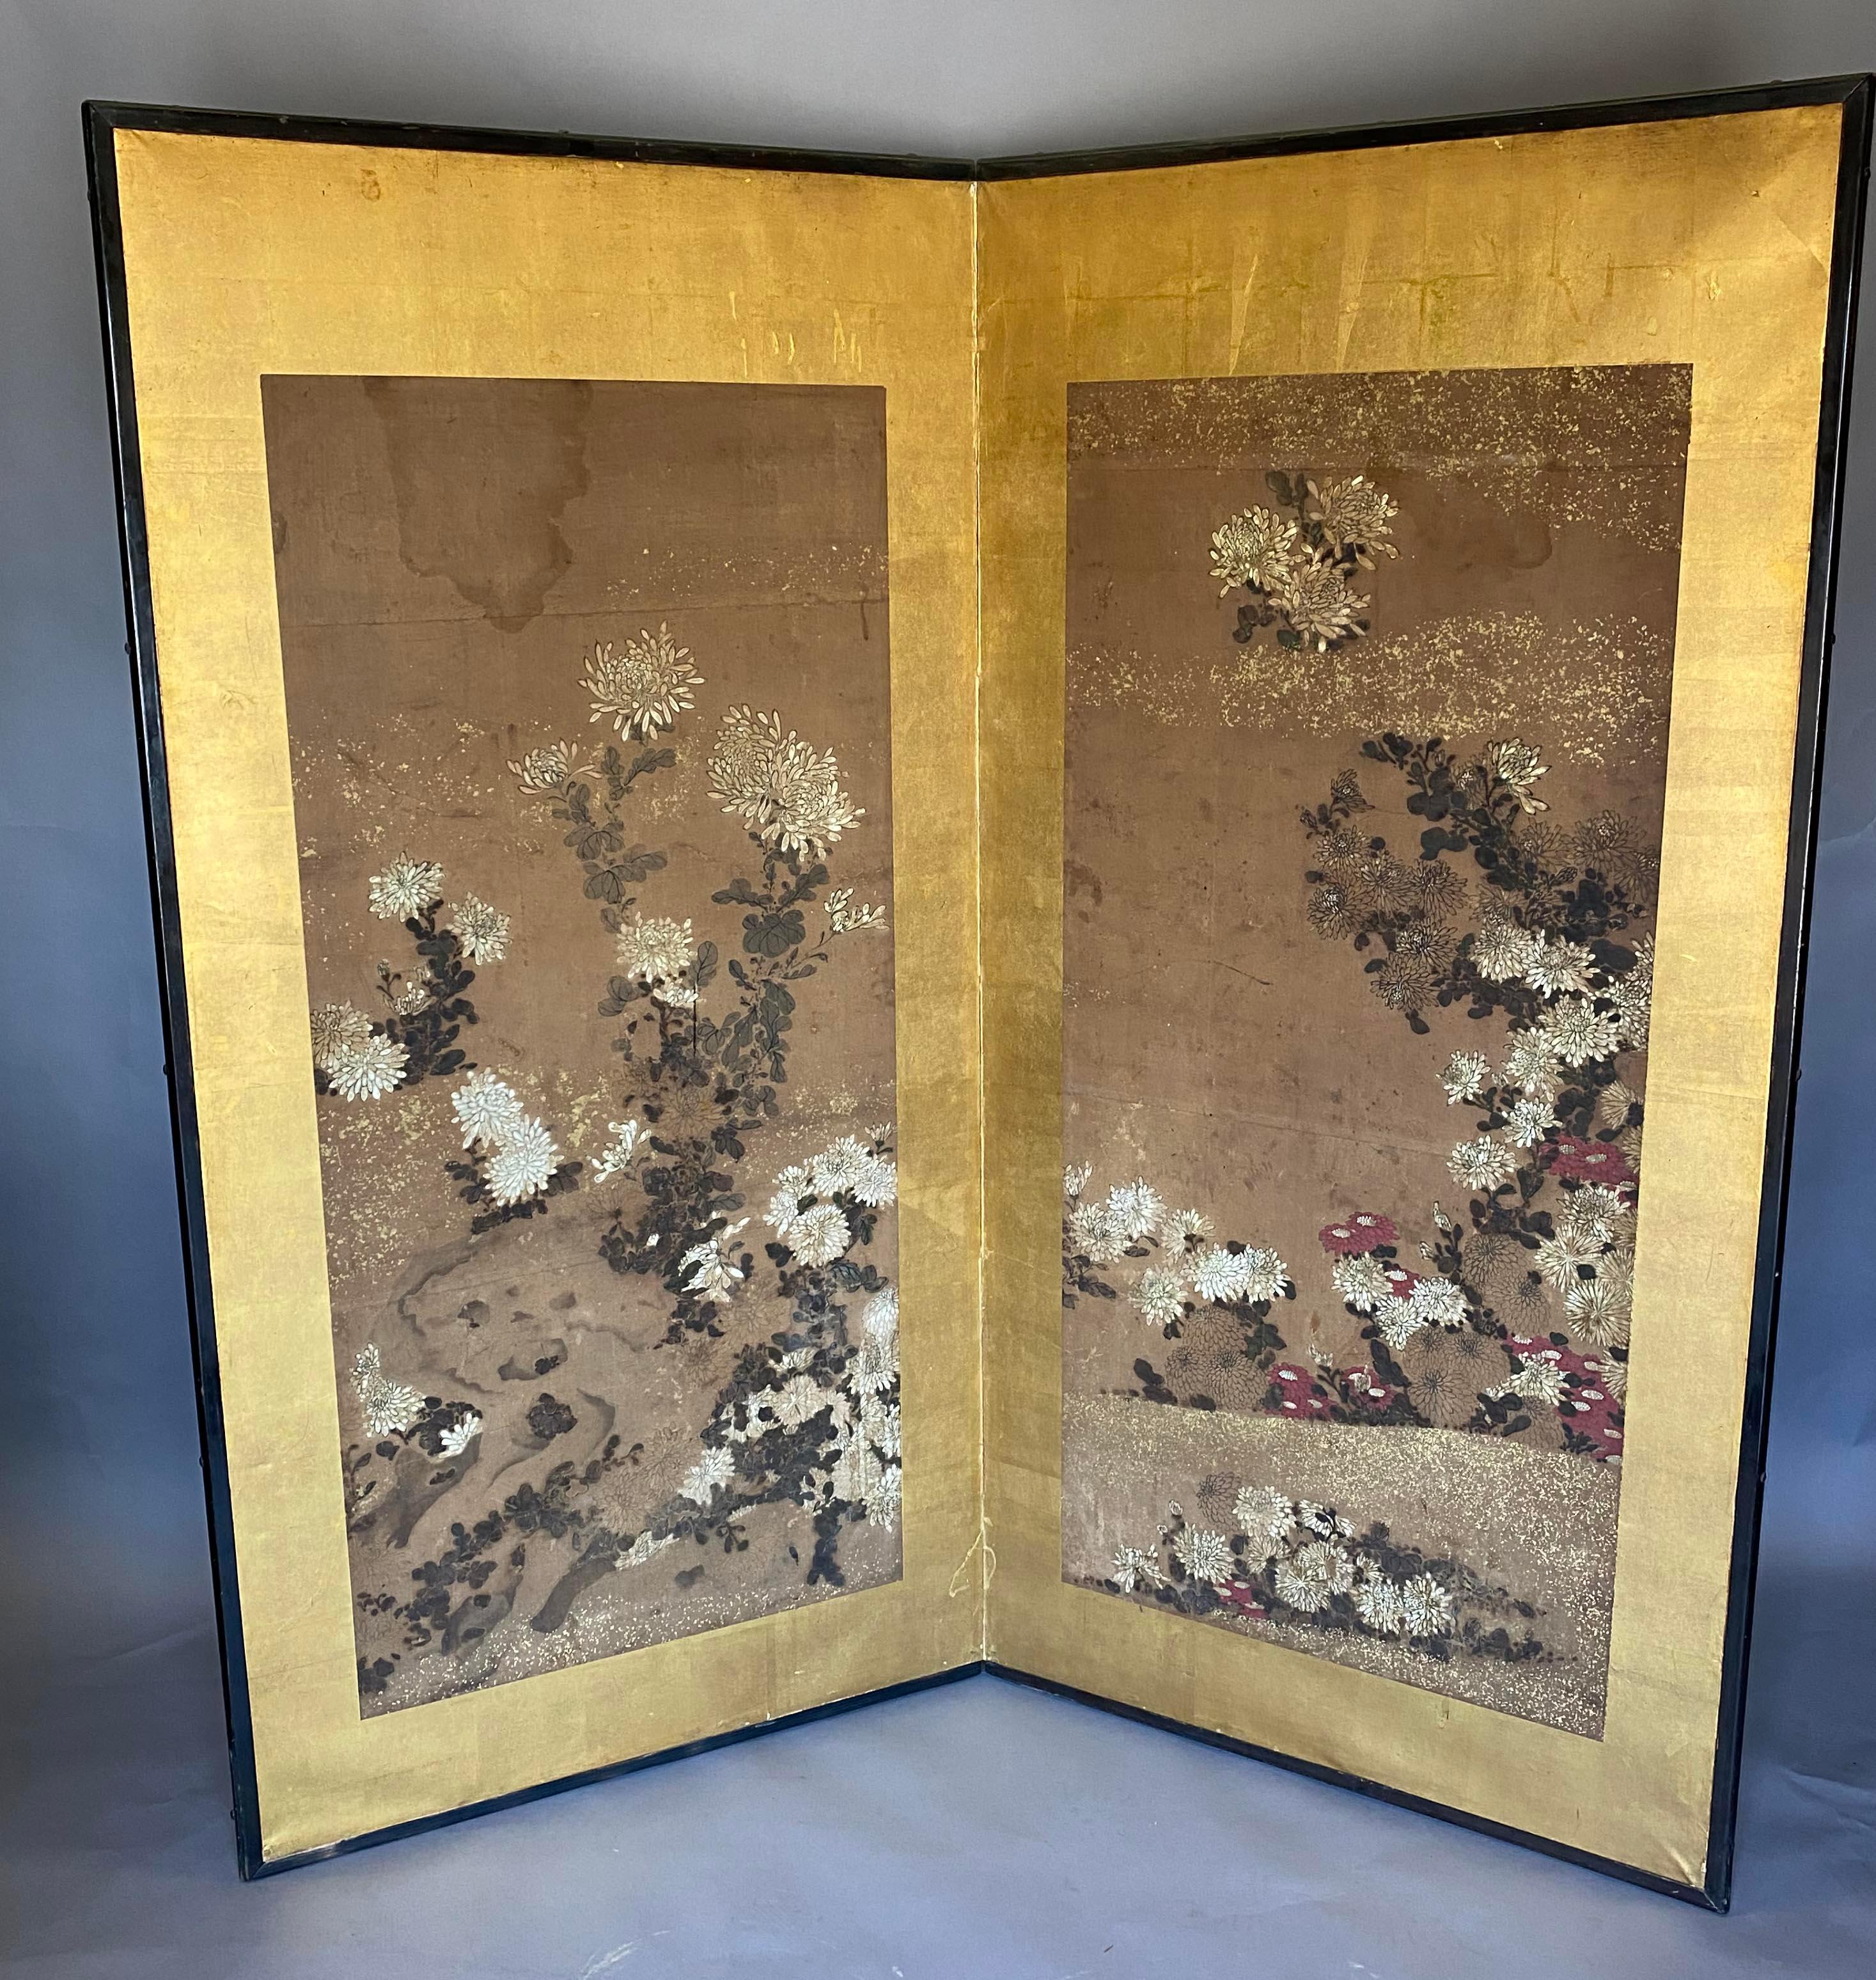 Late 18th early 19th century Edo period Kiku chrysanthemum painting on gold. It has old water stains, a repaired tear in front, a repaired base and a few tears on back side, none of which detracts from the delicate, elegant painting of the white